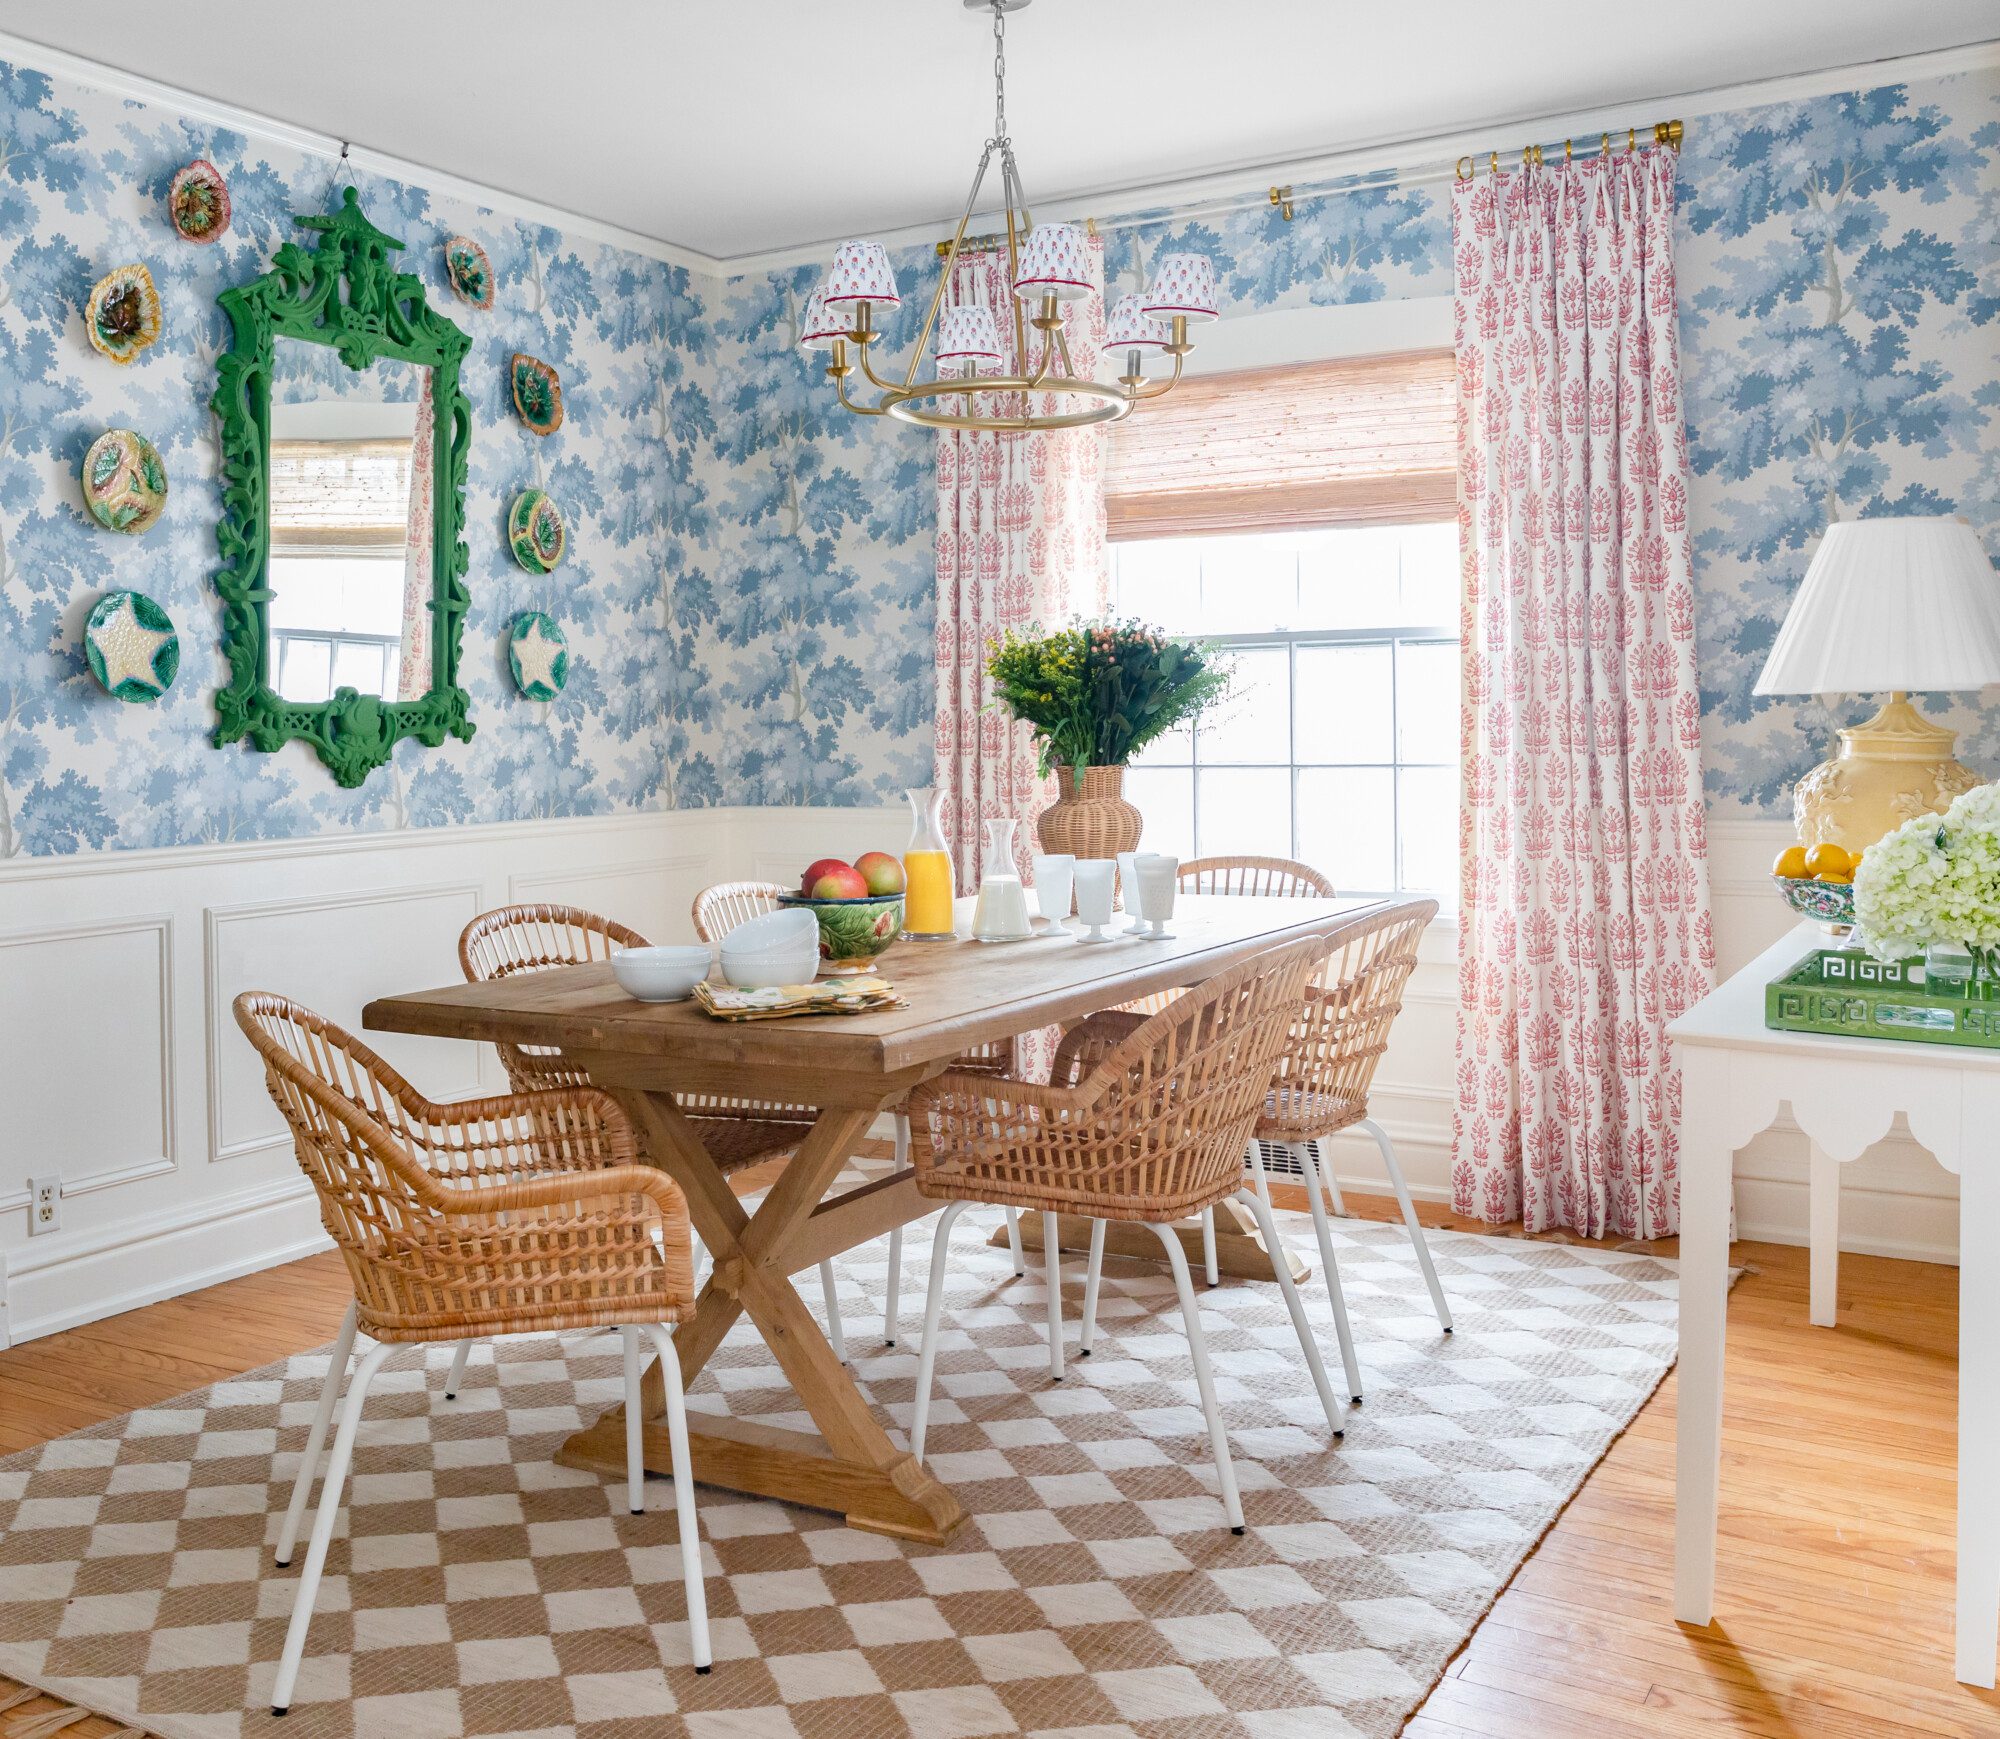 the whimsical use of color really make this room pop!